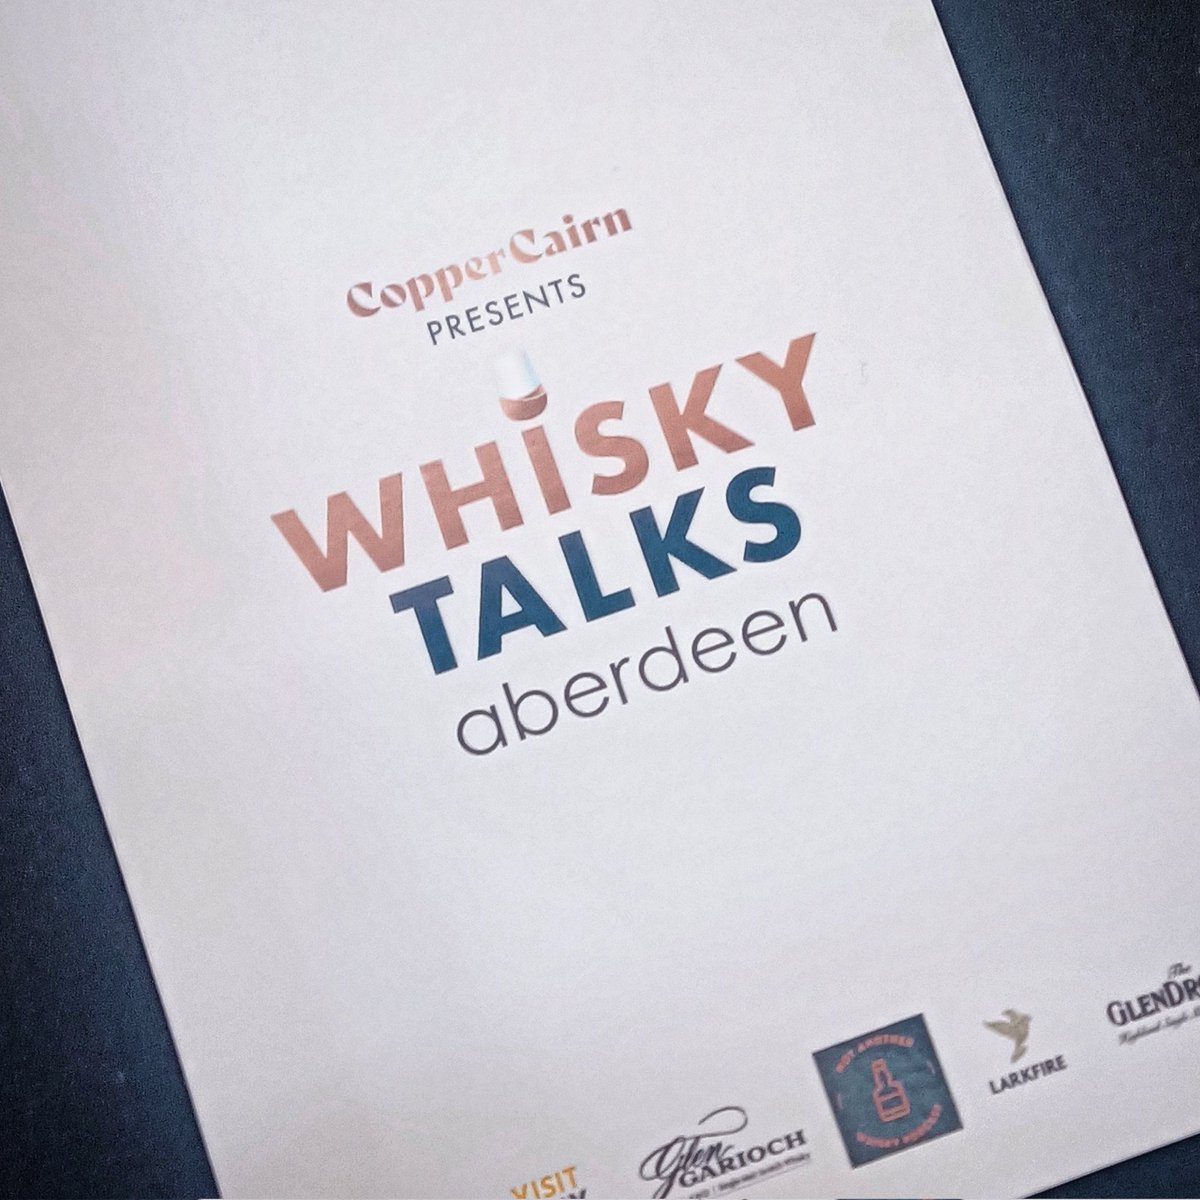 Looking forward to an interesting afternoon in Aberdeen. @CopperCairn #whiskytalks